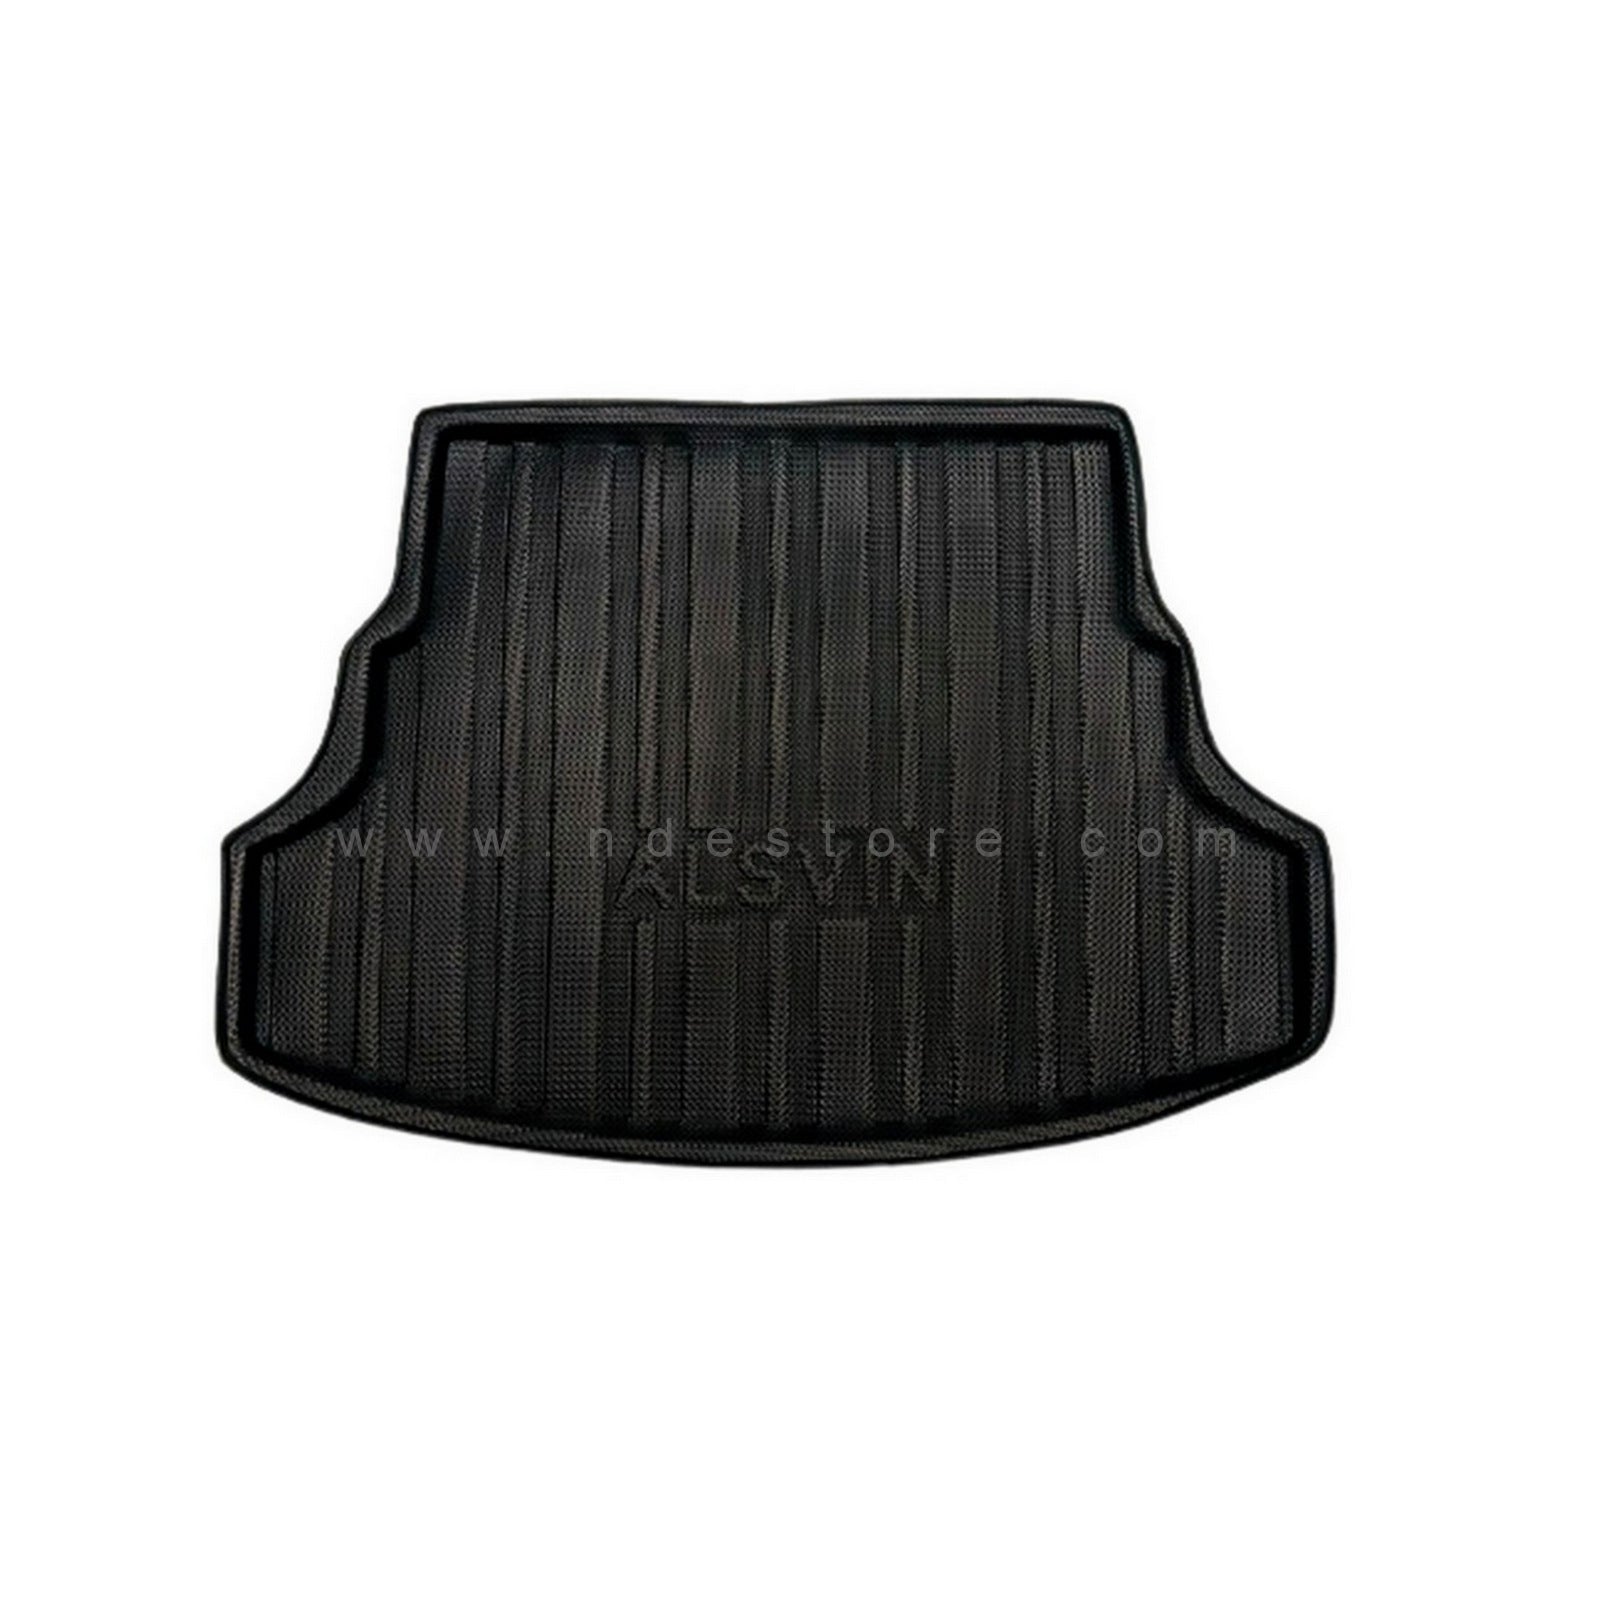 TRUNK TRAY FOR CHANGAN ALSVIN